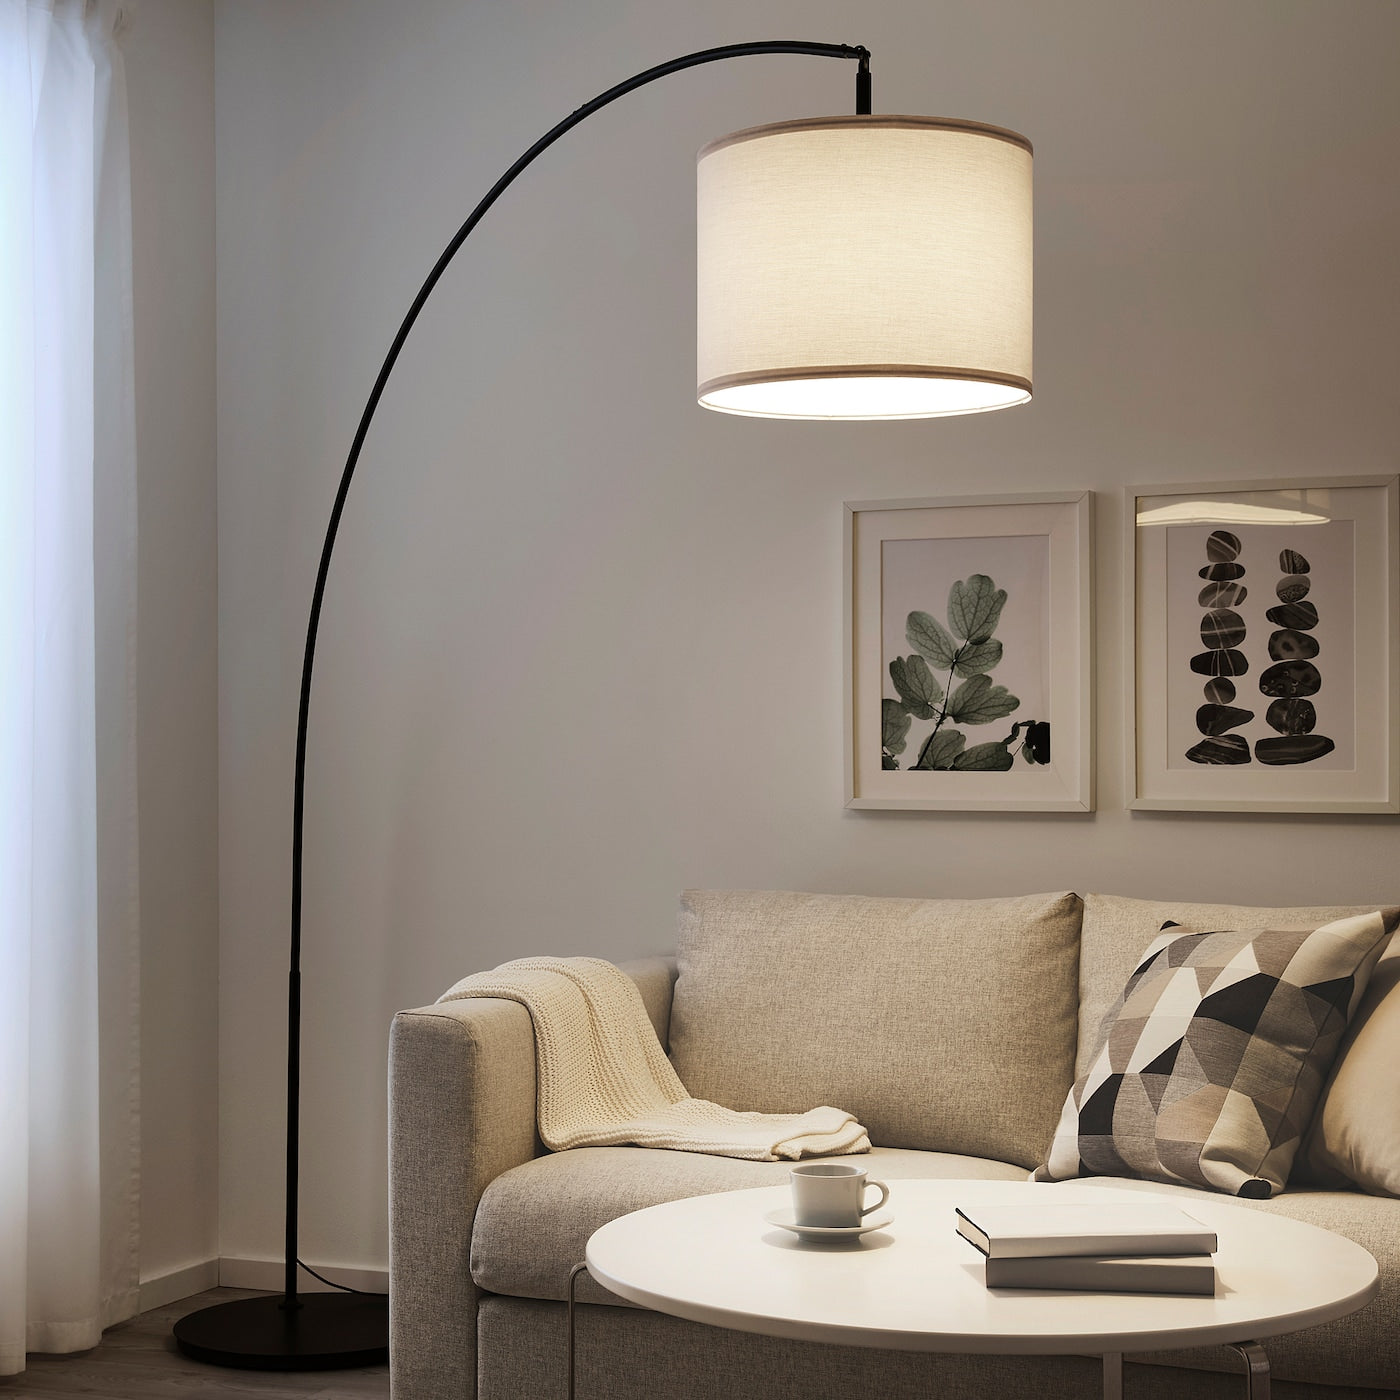 Why Floor Lamps are Making a Comeback